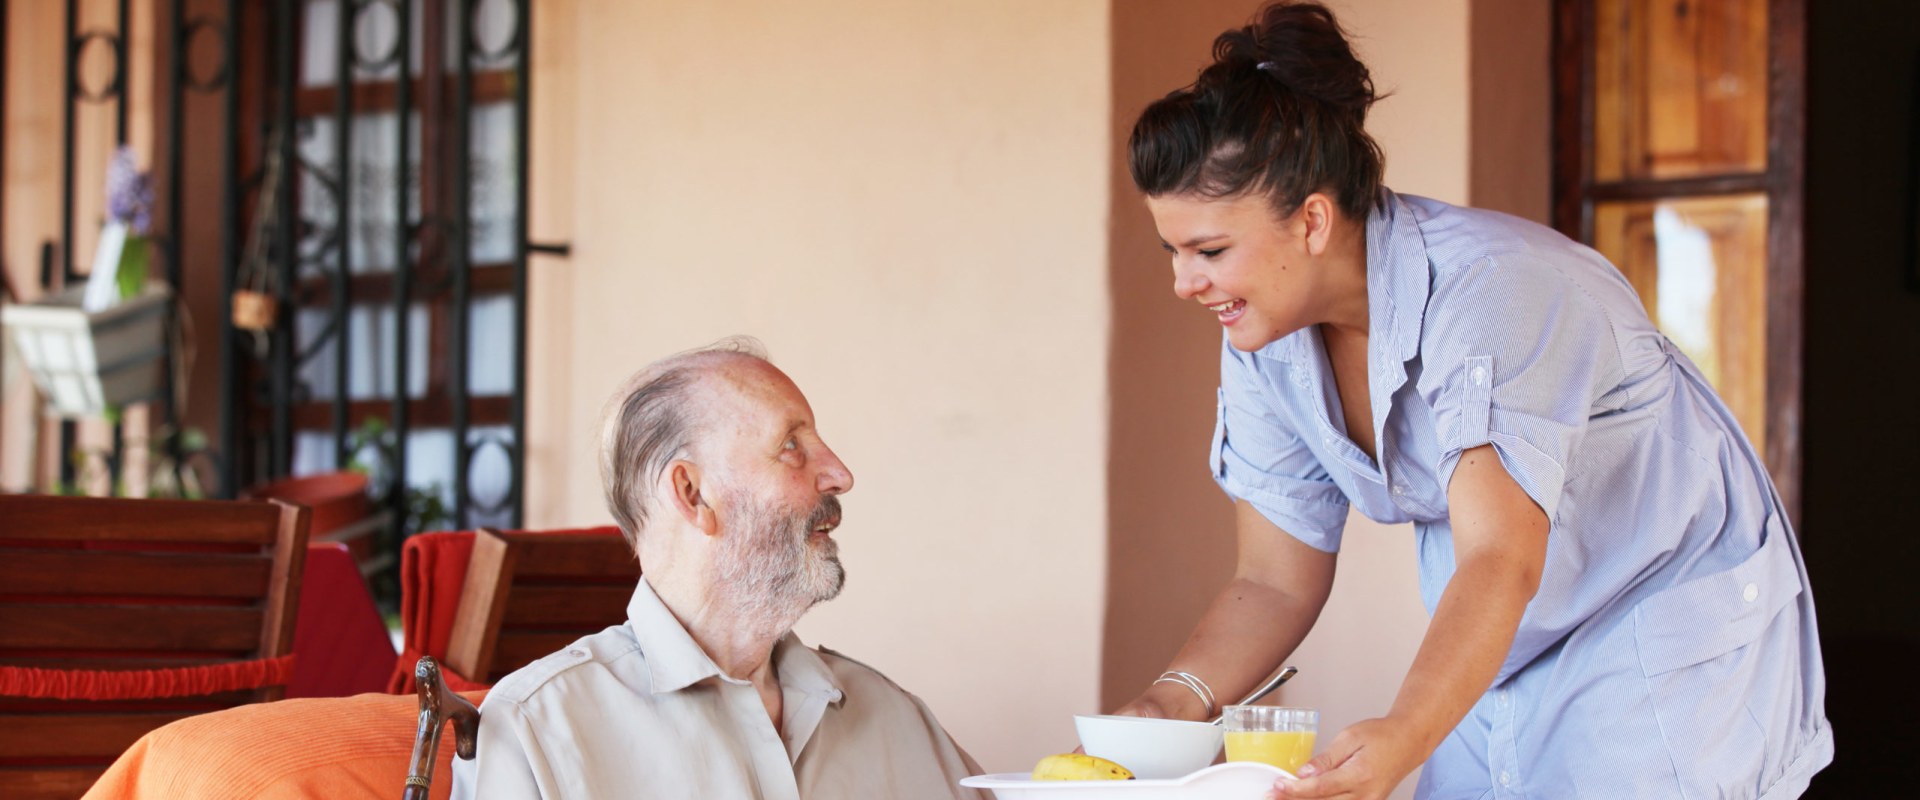 Caring for People with HIV/AIDS in Orange County: Home Health Care Aides and Nurses